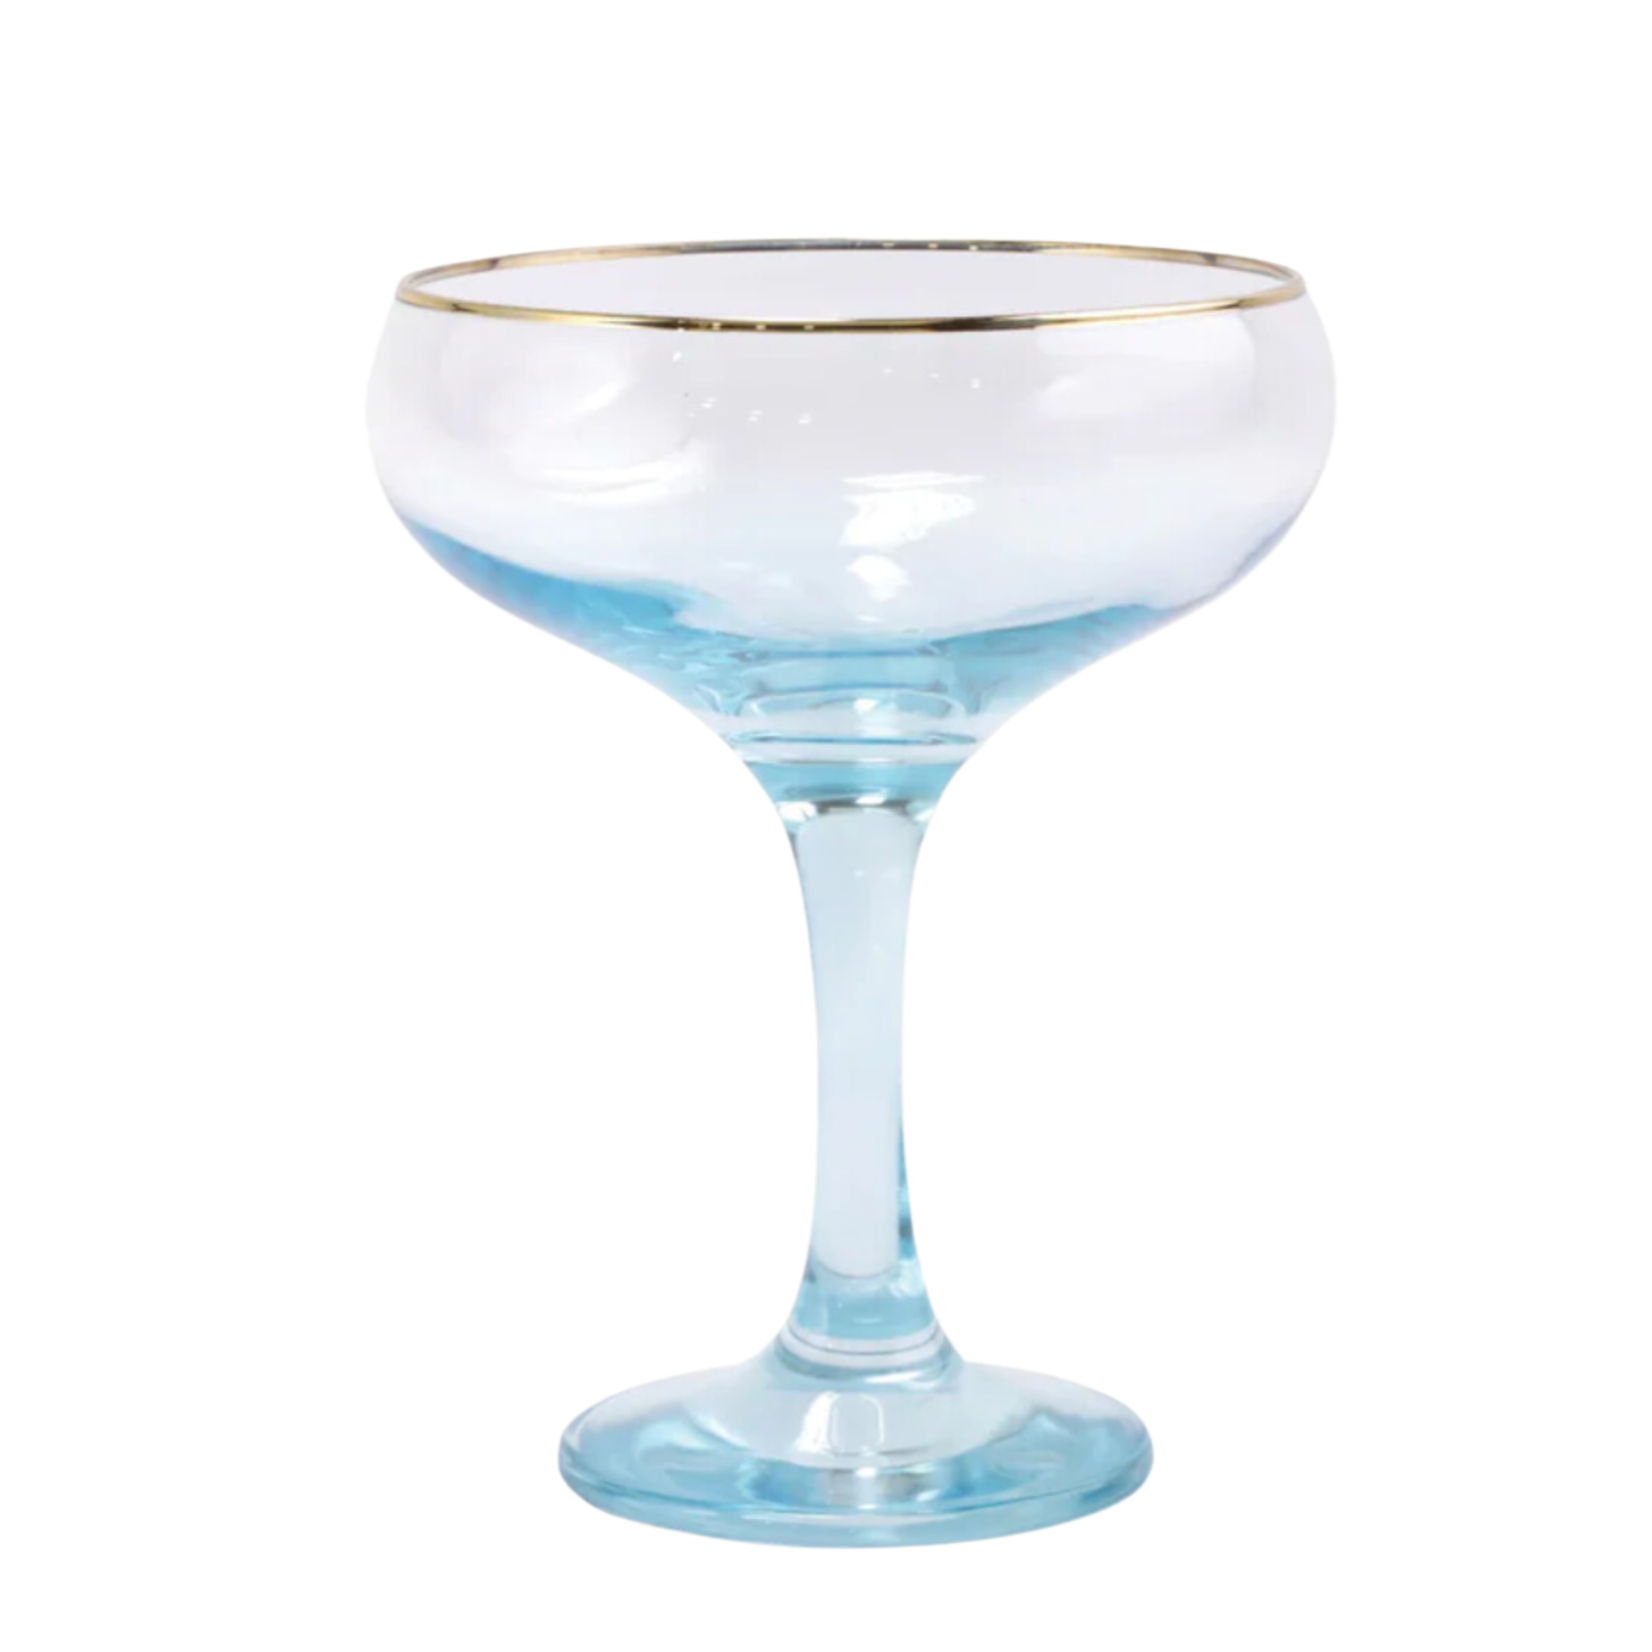 Rainbow Coupe Champagne Glass